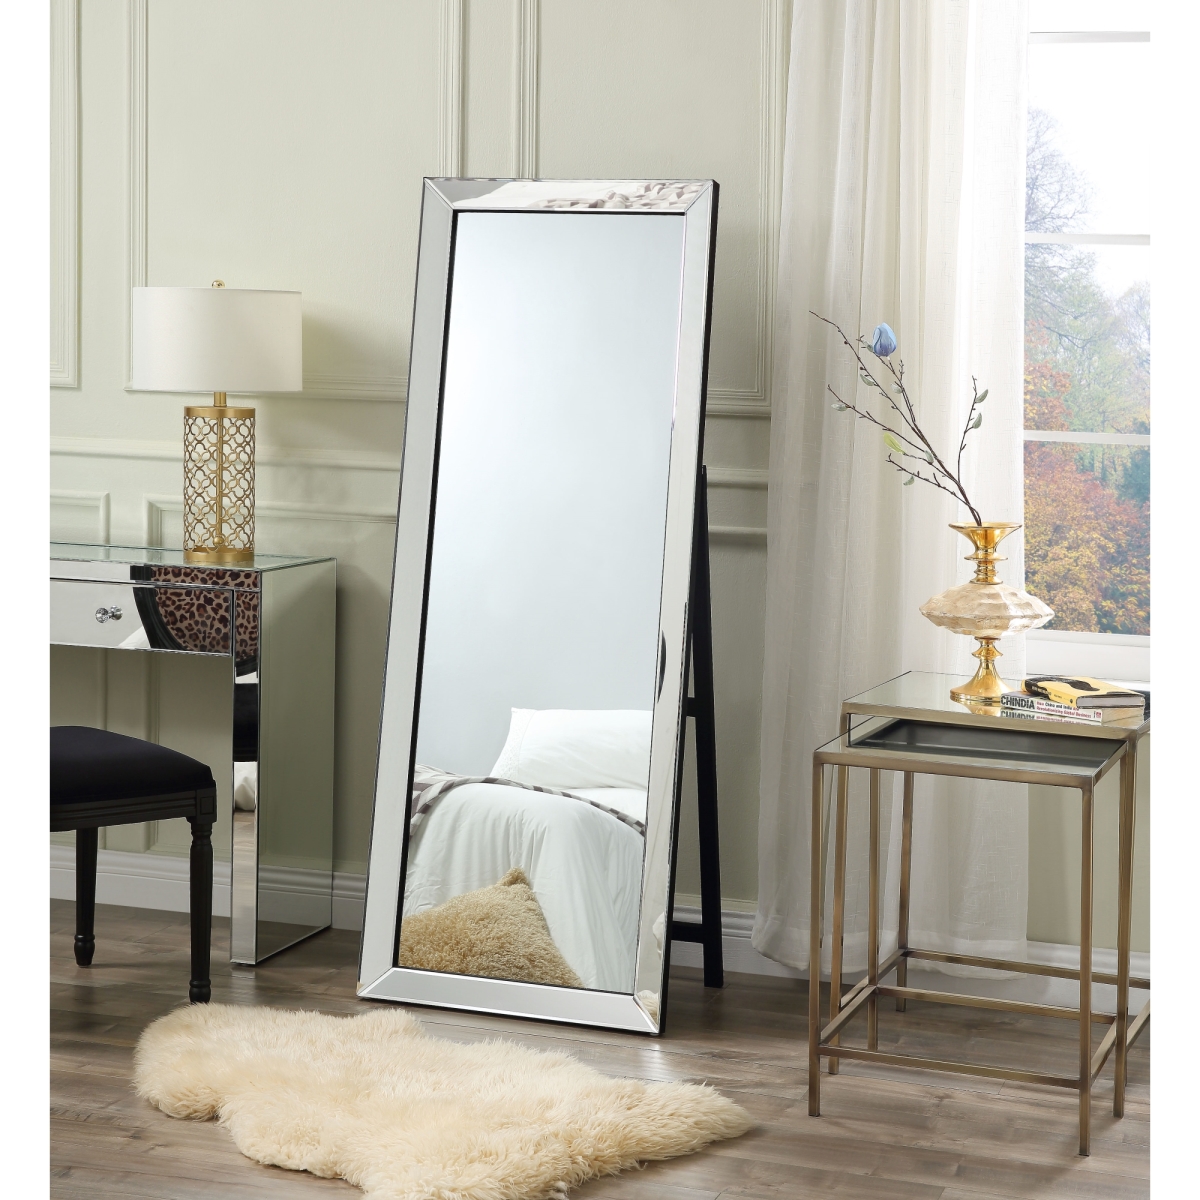 Jf147-09nc Kimbery Full Length Foldable Floor Standing Mirror - 63 X 1.5 X 23.6 In.